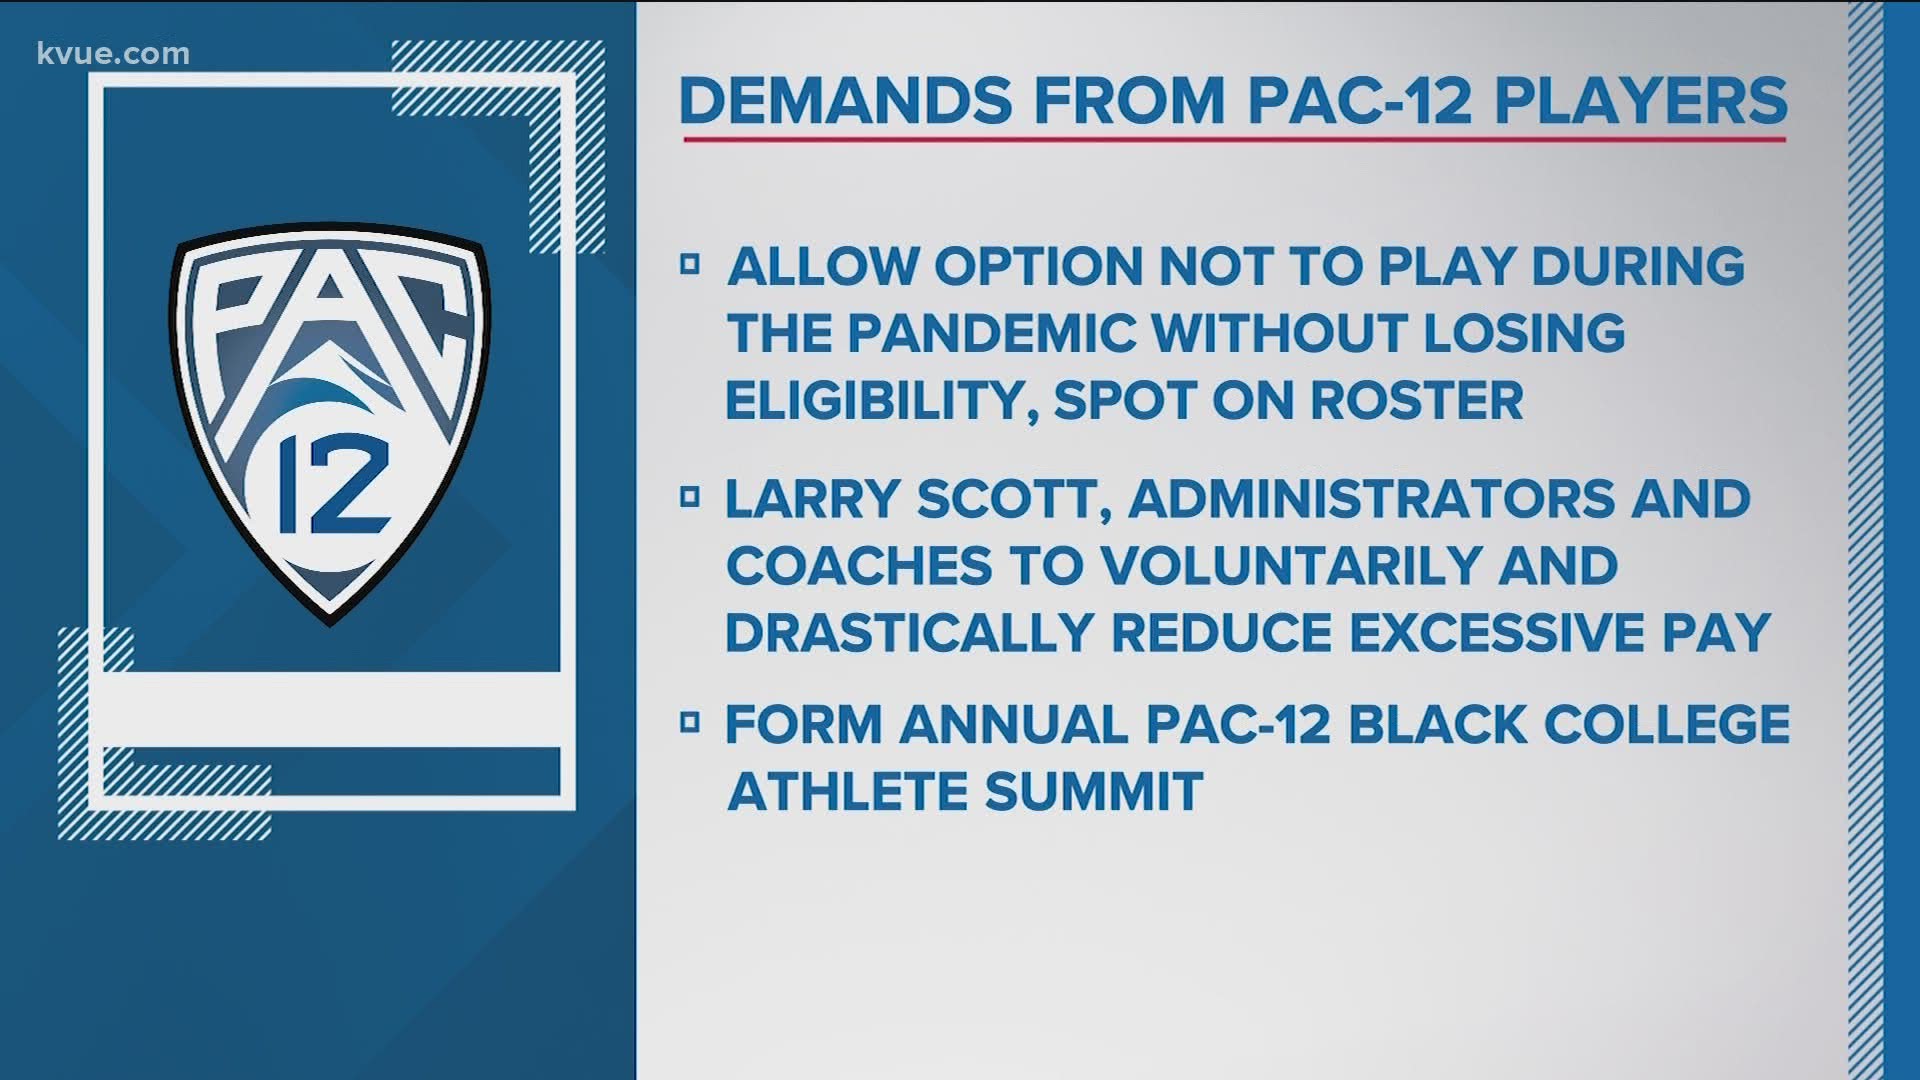 ESPN reported on Saturday a group of players is threatening not to play if their demands aren't met.